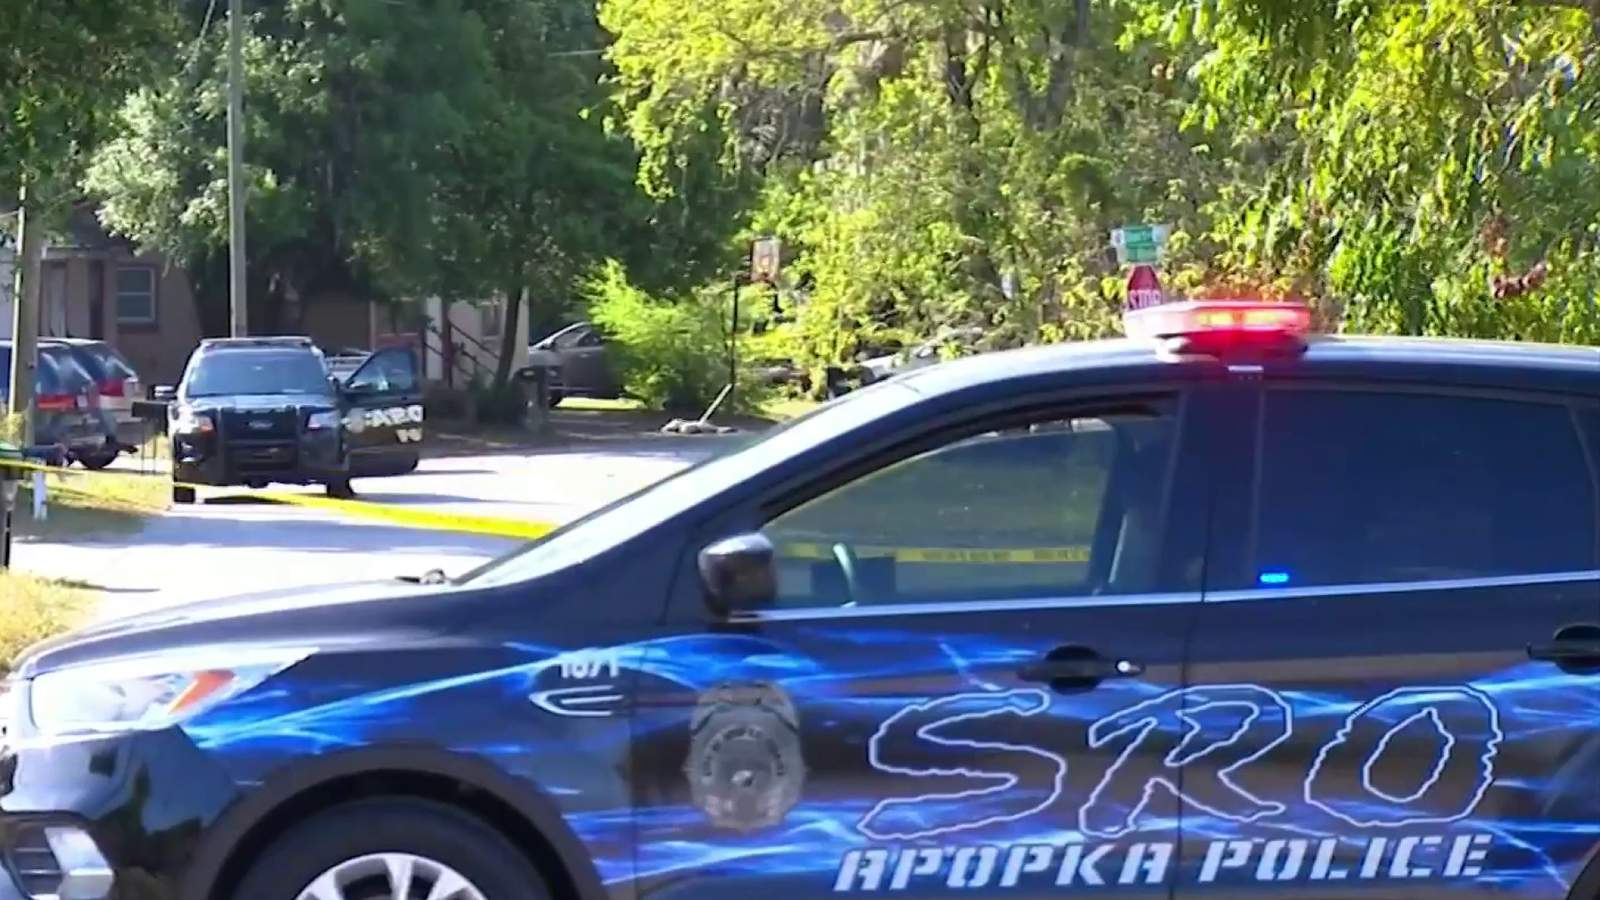 9-year-old girl, grandfather struck after shots fired into Apopka home, police say